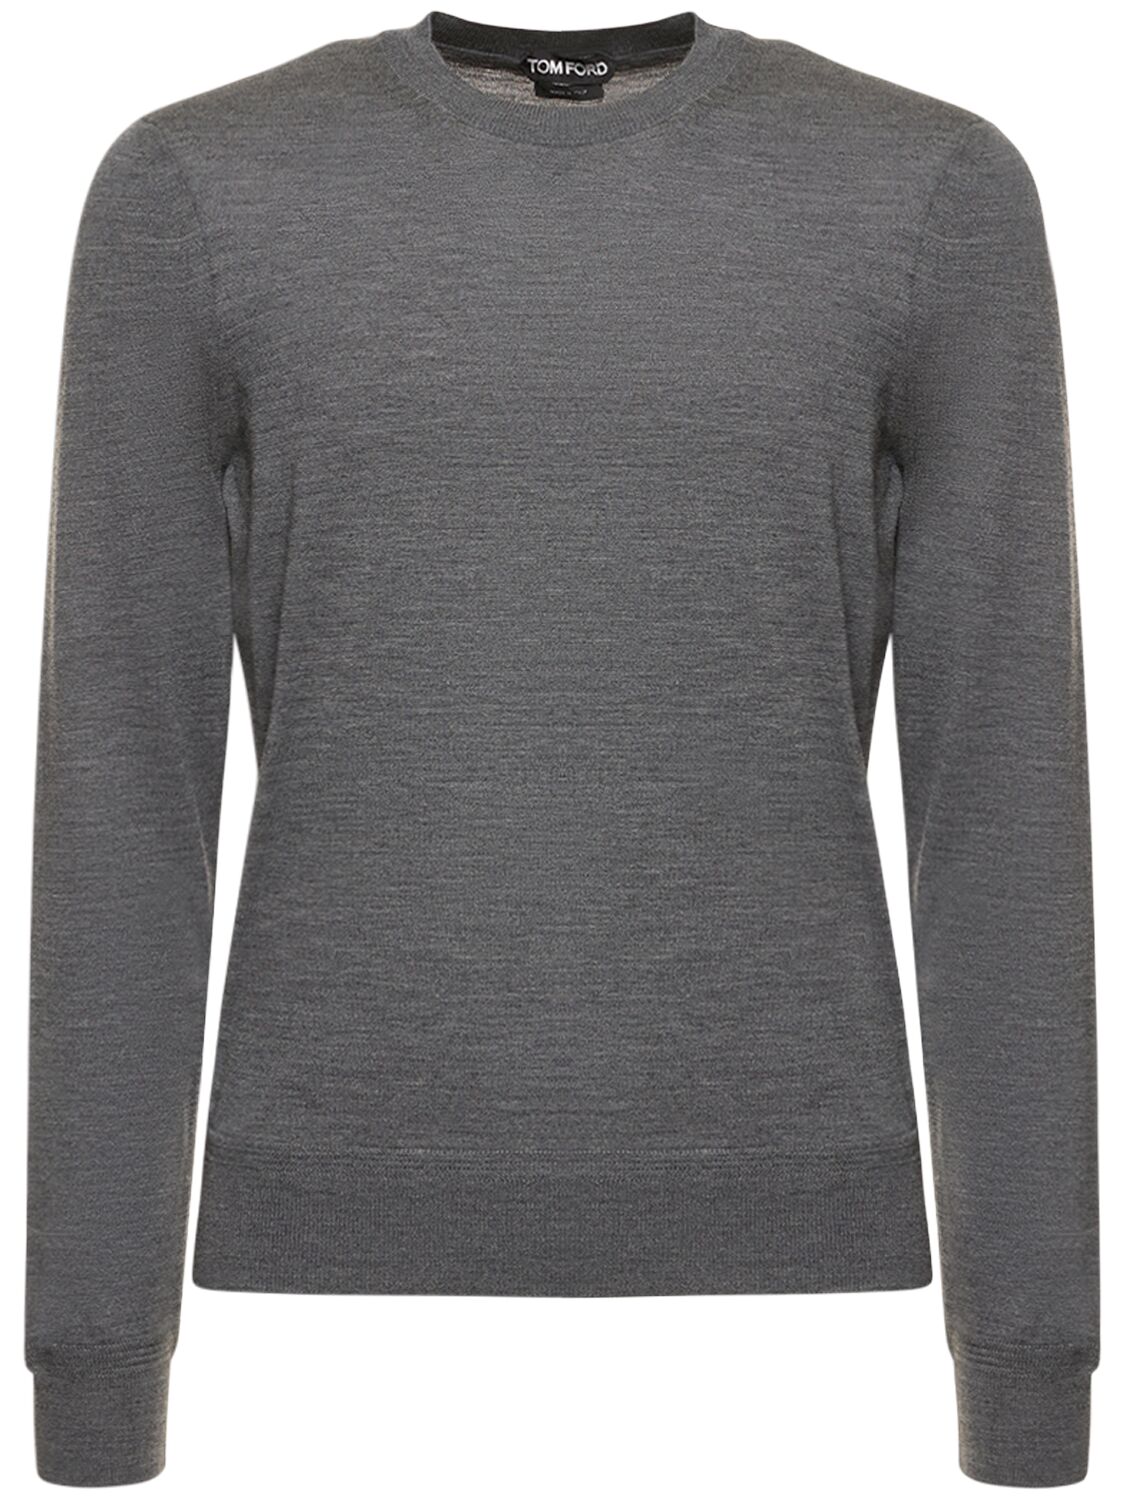 Tom Ford Fine Gauge Wool Knit Crewneck Sweater In Light Charcoal